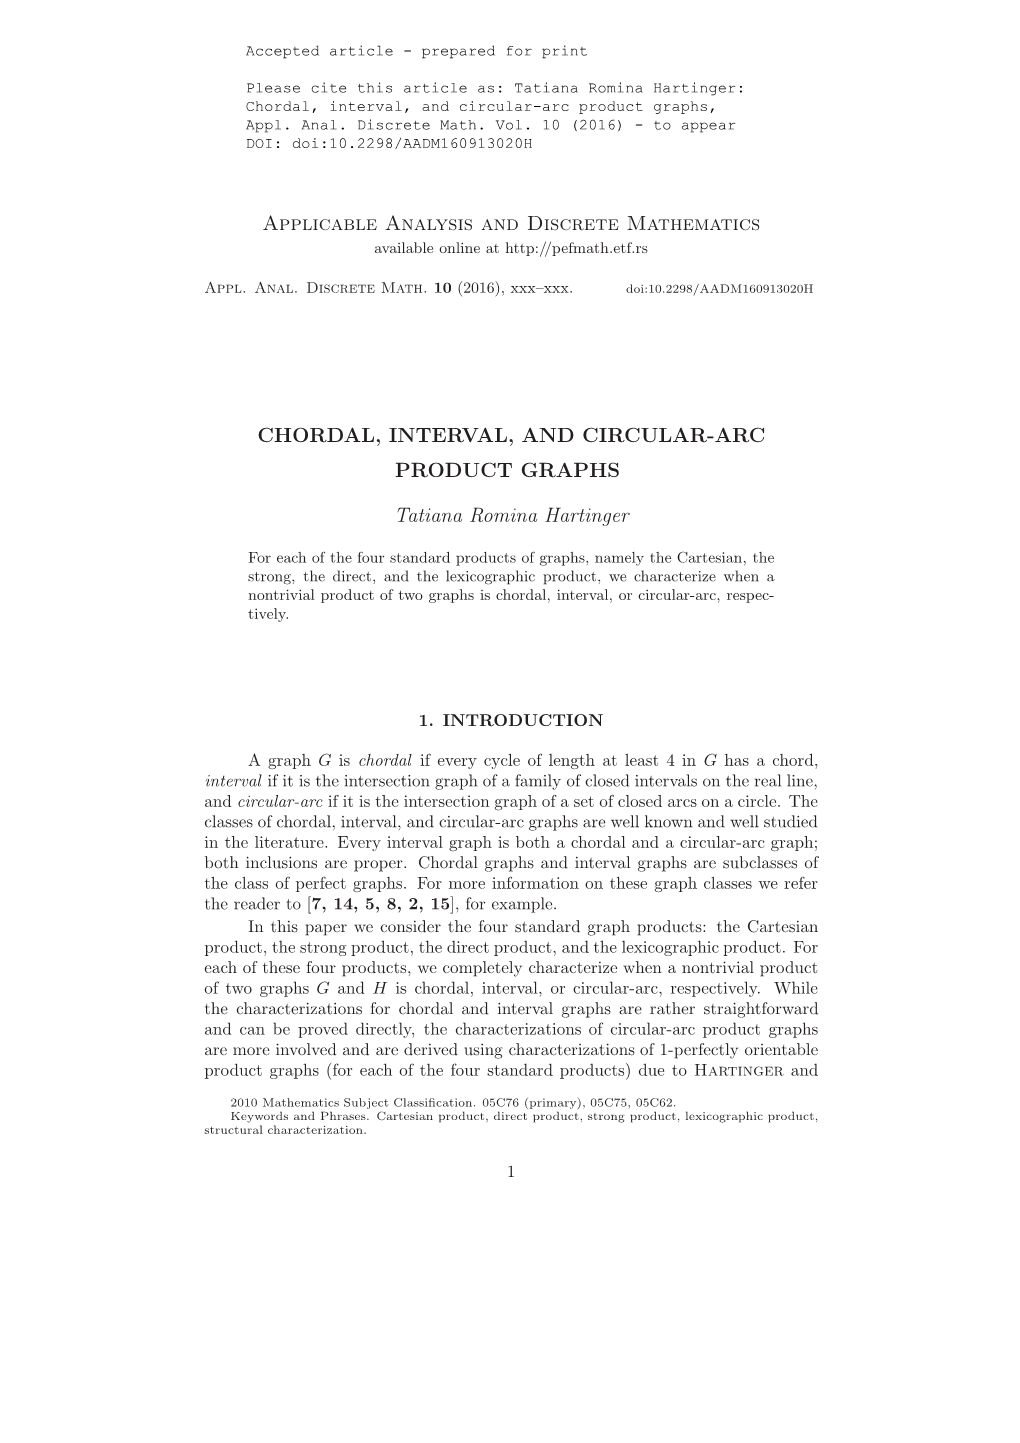 Applicable Analysis and Discrete Mathematics CHORDAL